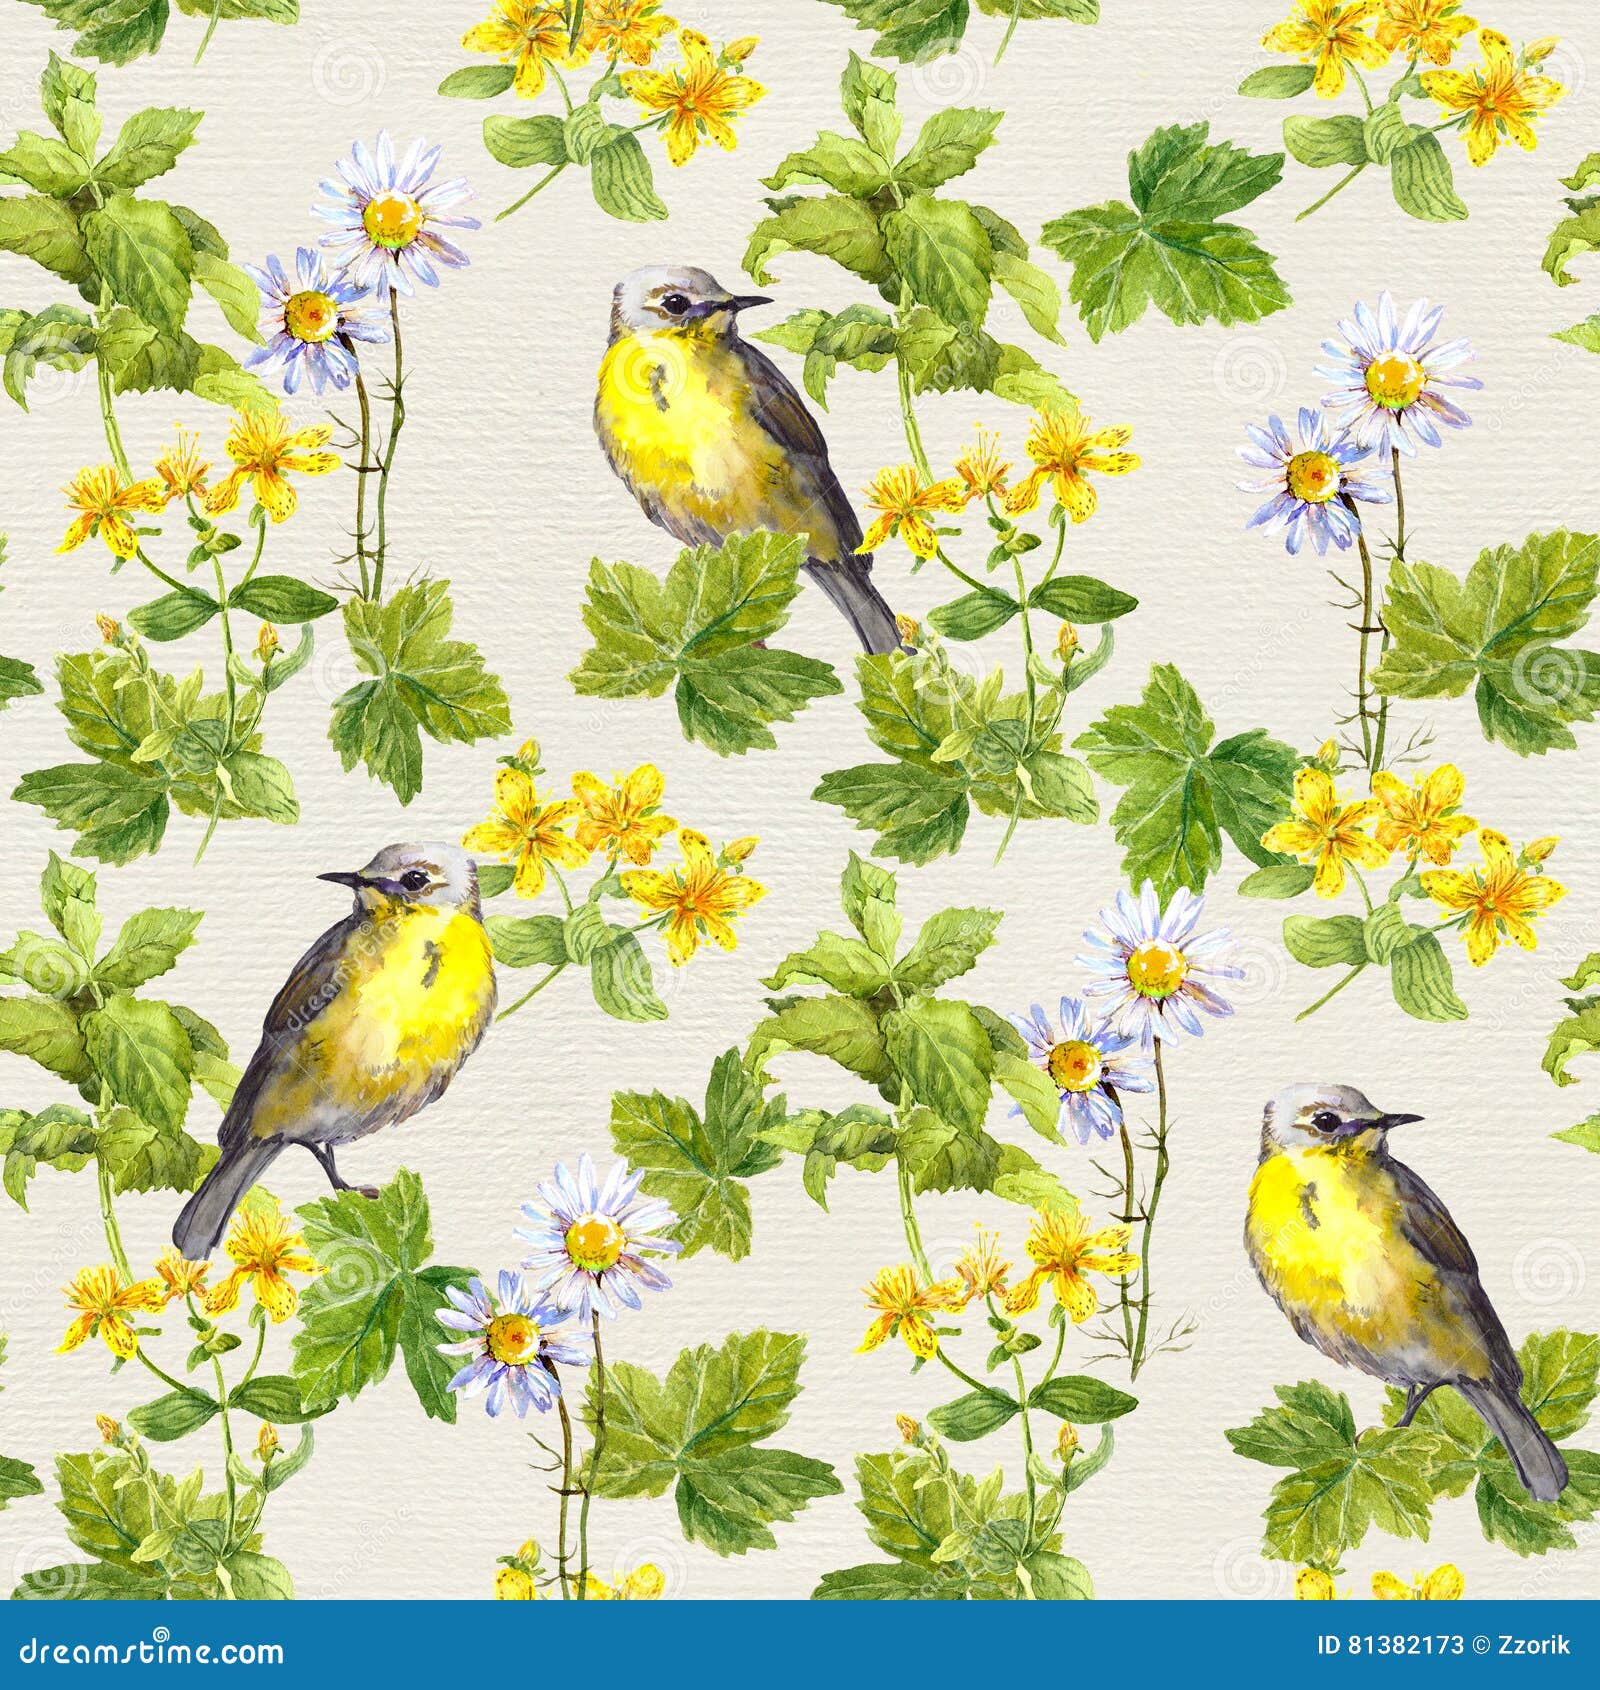 birds in floral garden - flowers, herbs. watercolor. repetitive pattern.